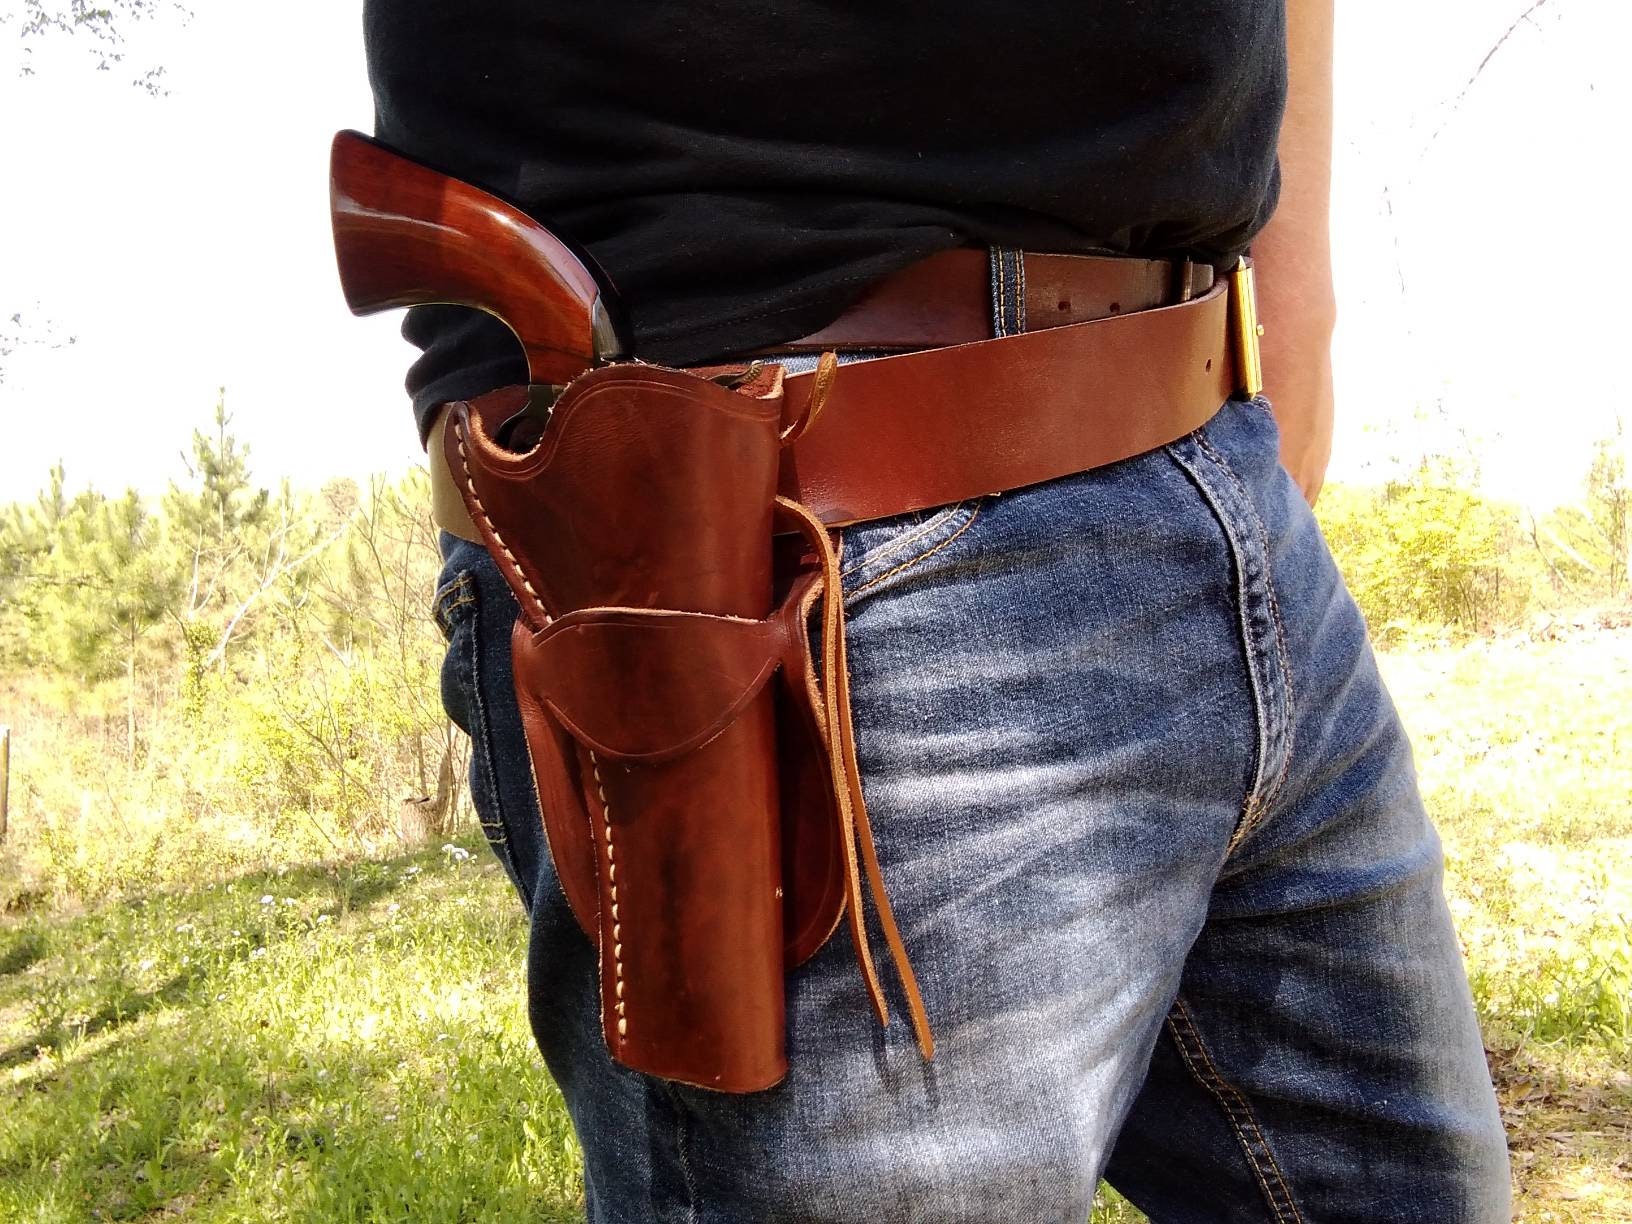 Single Action Revolver Holster and Belt Rig | Etsy